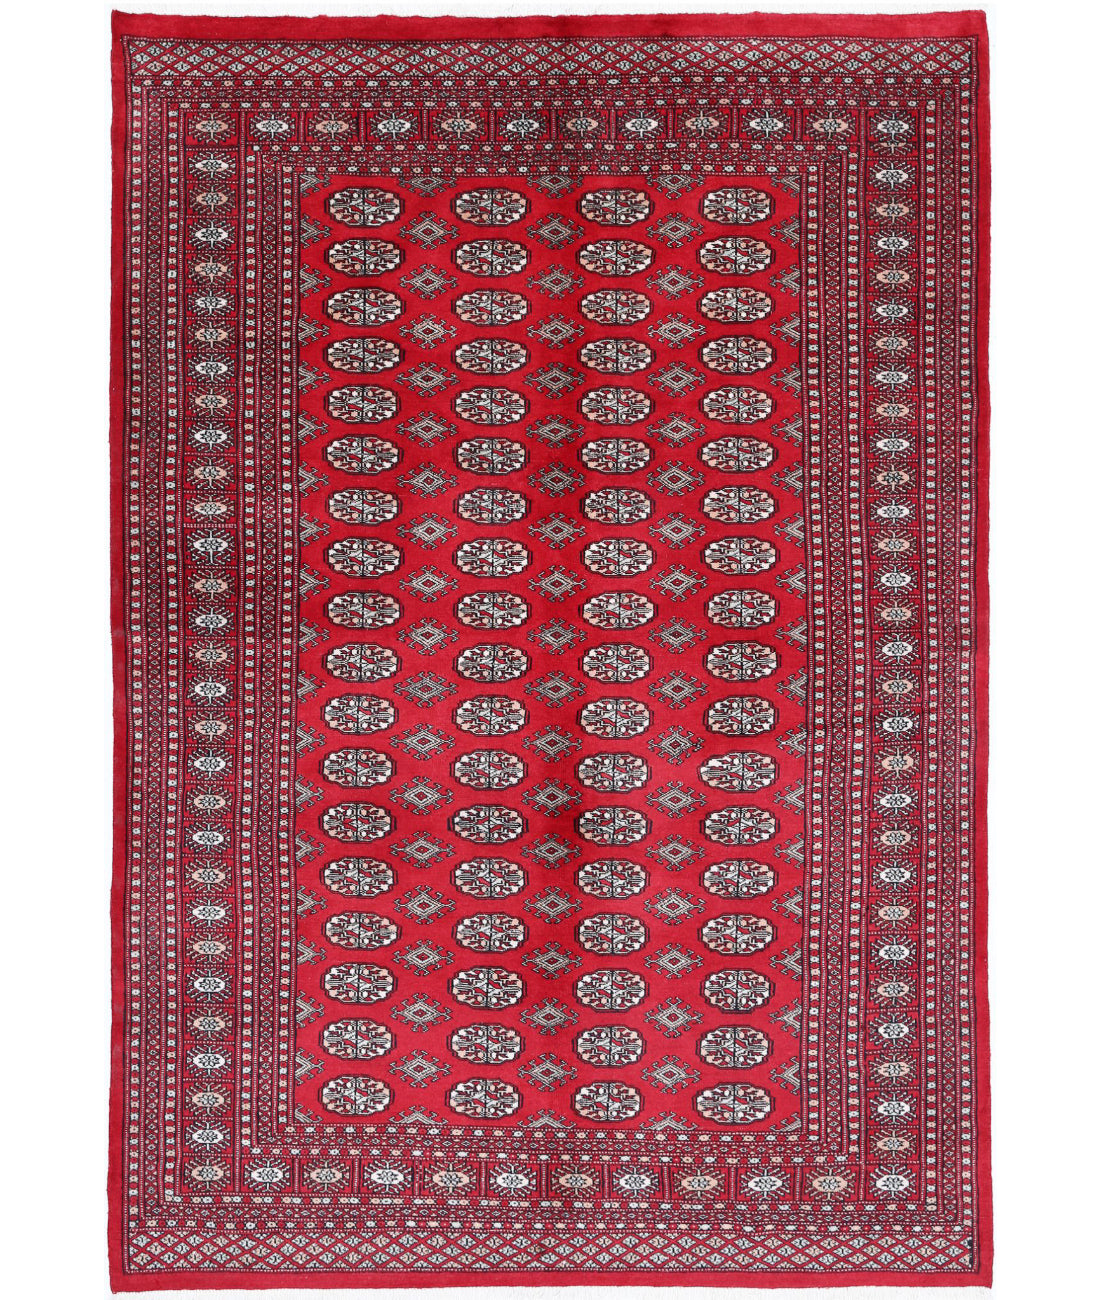 Hand Knotted Tribal Bokhara Wool Rug - 5&#39;10&#39;&#39; x 8&#39;6&#39;&#39; 5&#39;10&#39;&#39; x 8&#39;6&#39;&#39; (175 X 255) / Red / Black